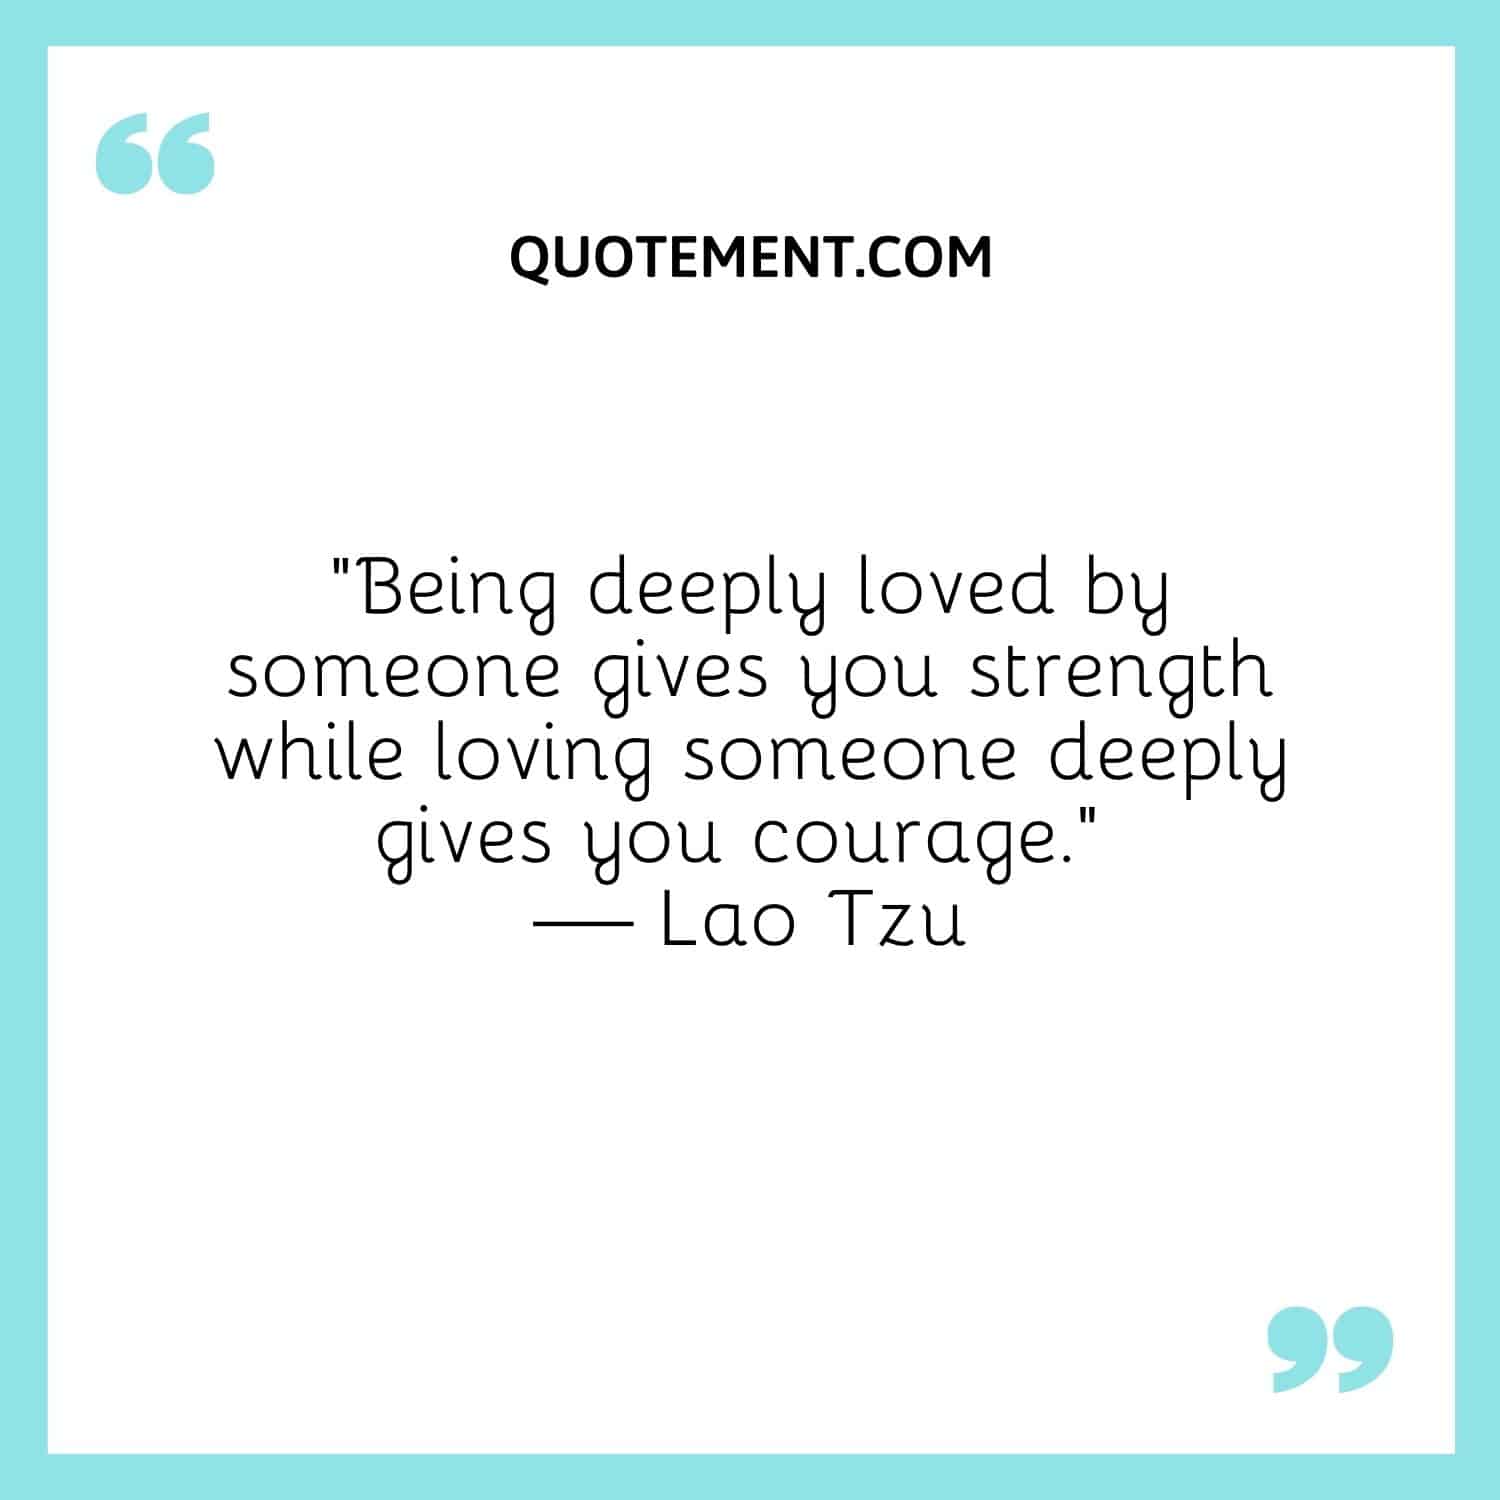 Being deeply loved by someone gives you strength while loving someone deeply gives you courage